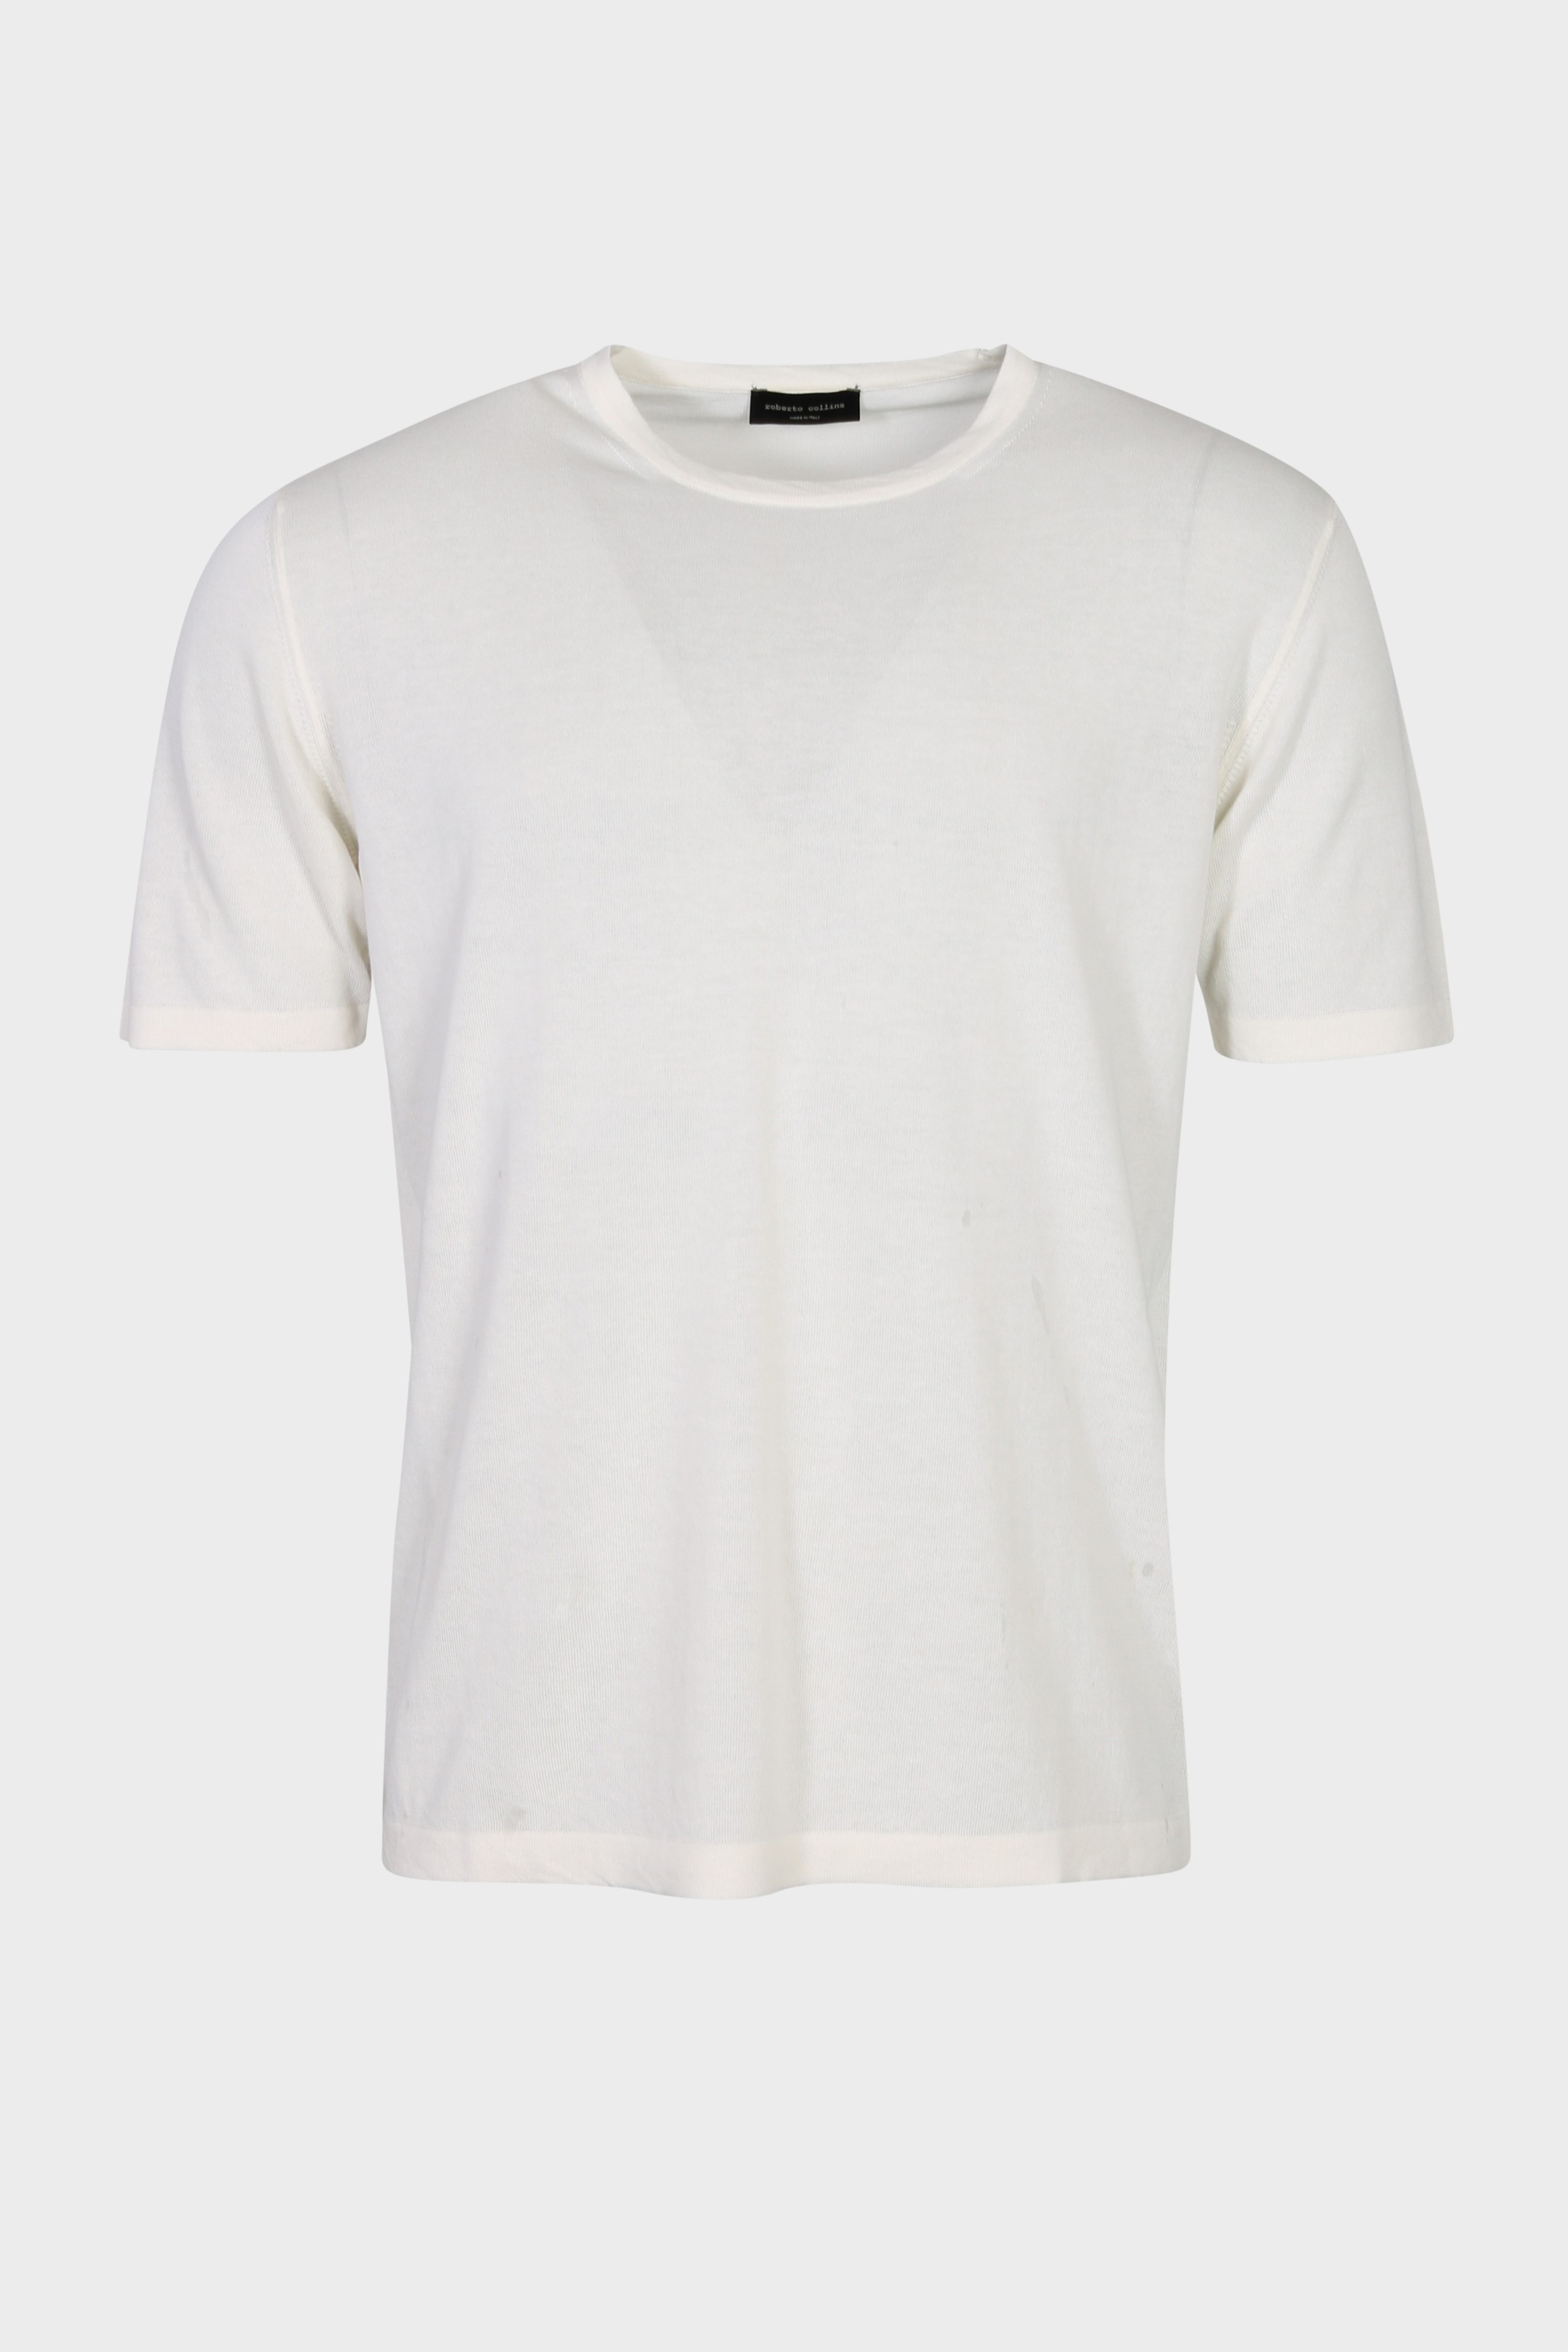 ROBERTO COLLINA Cotton Knit T-Shirt in Offwhite 54